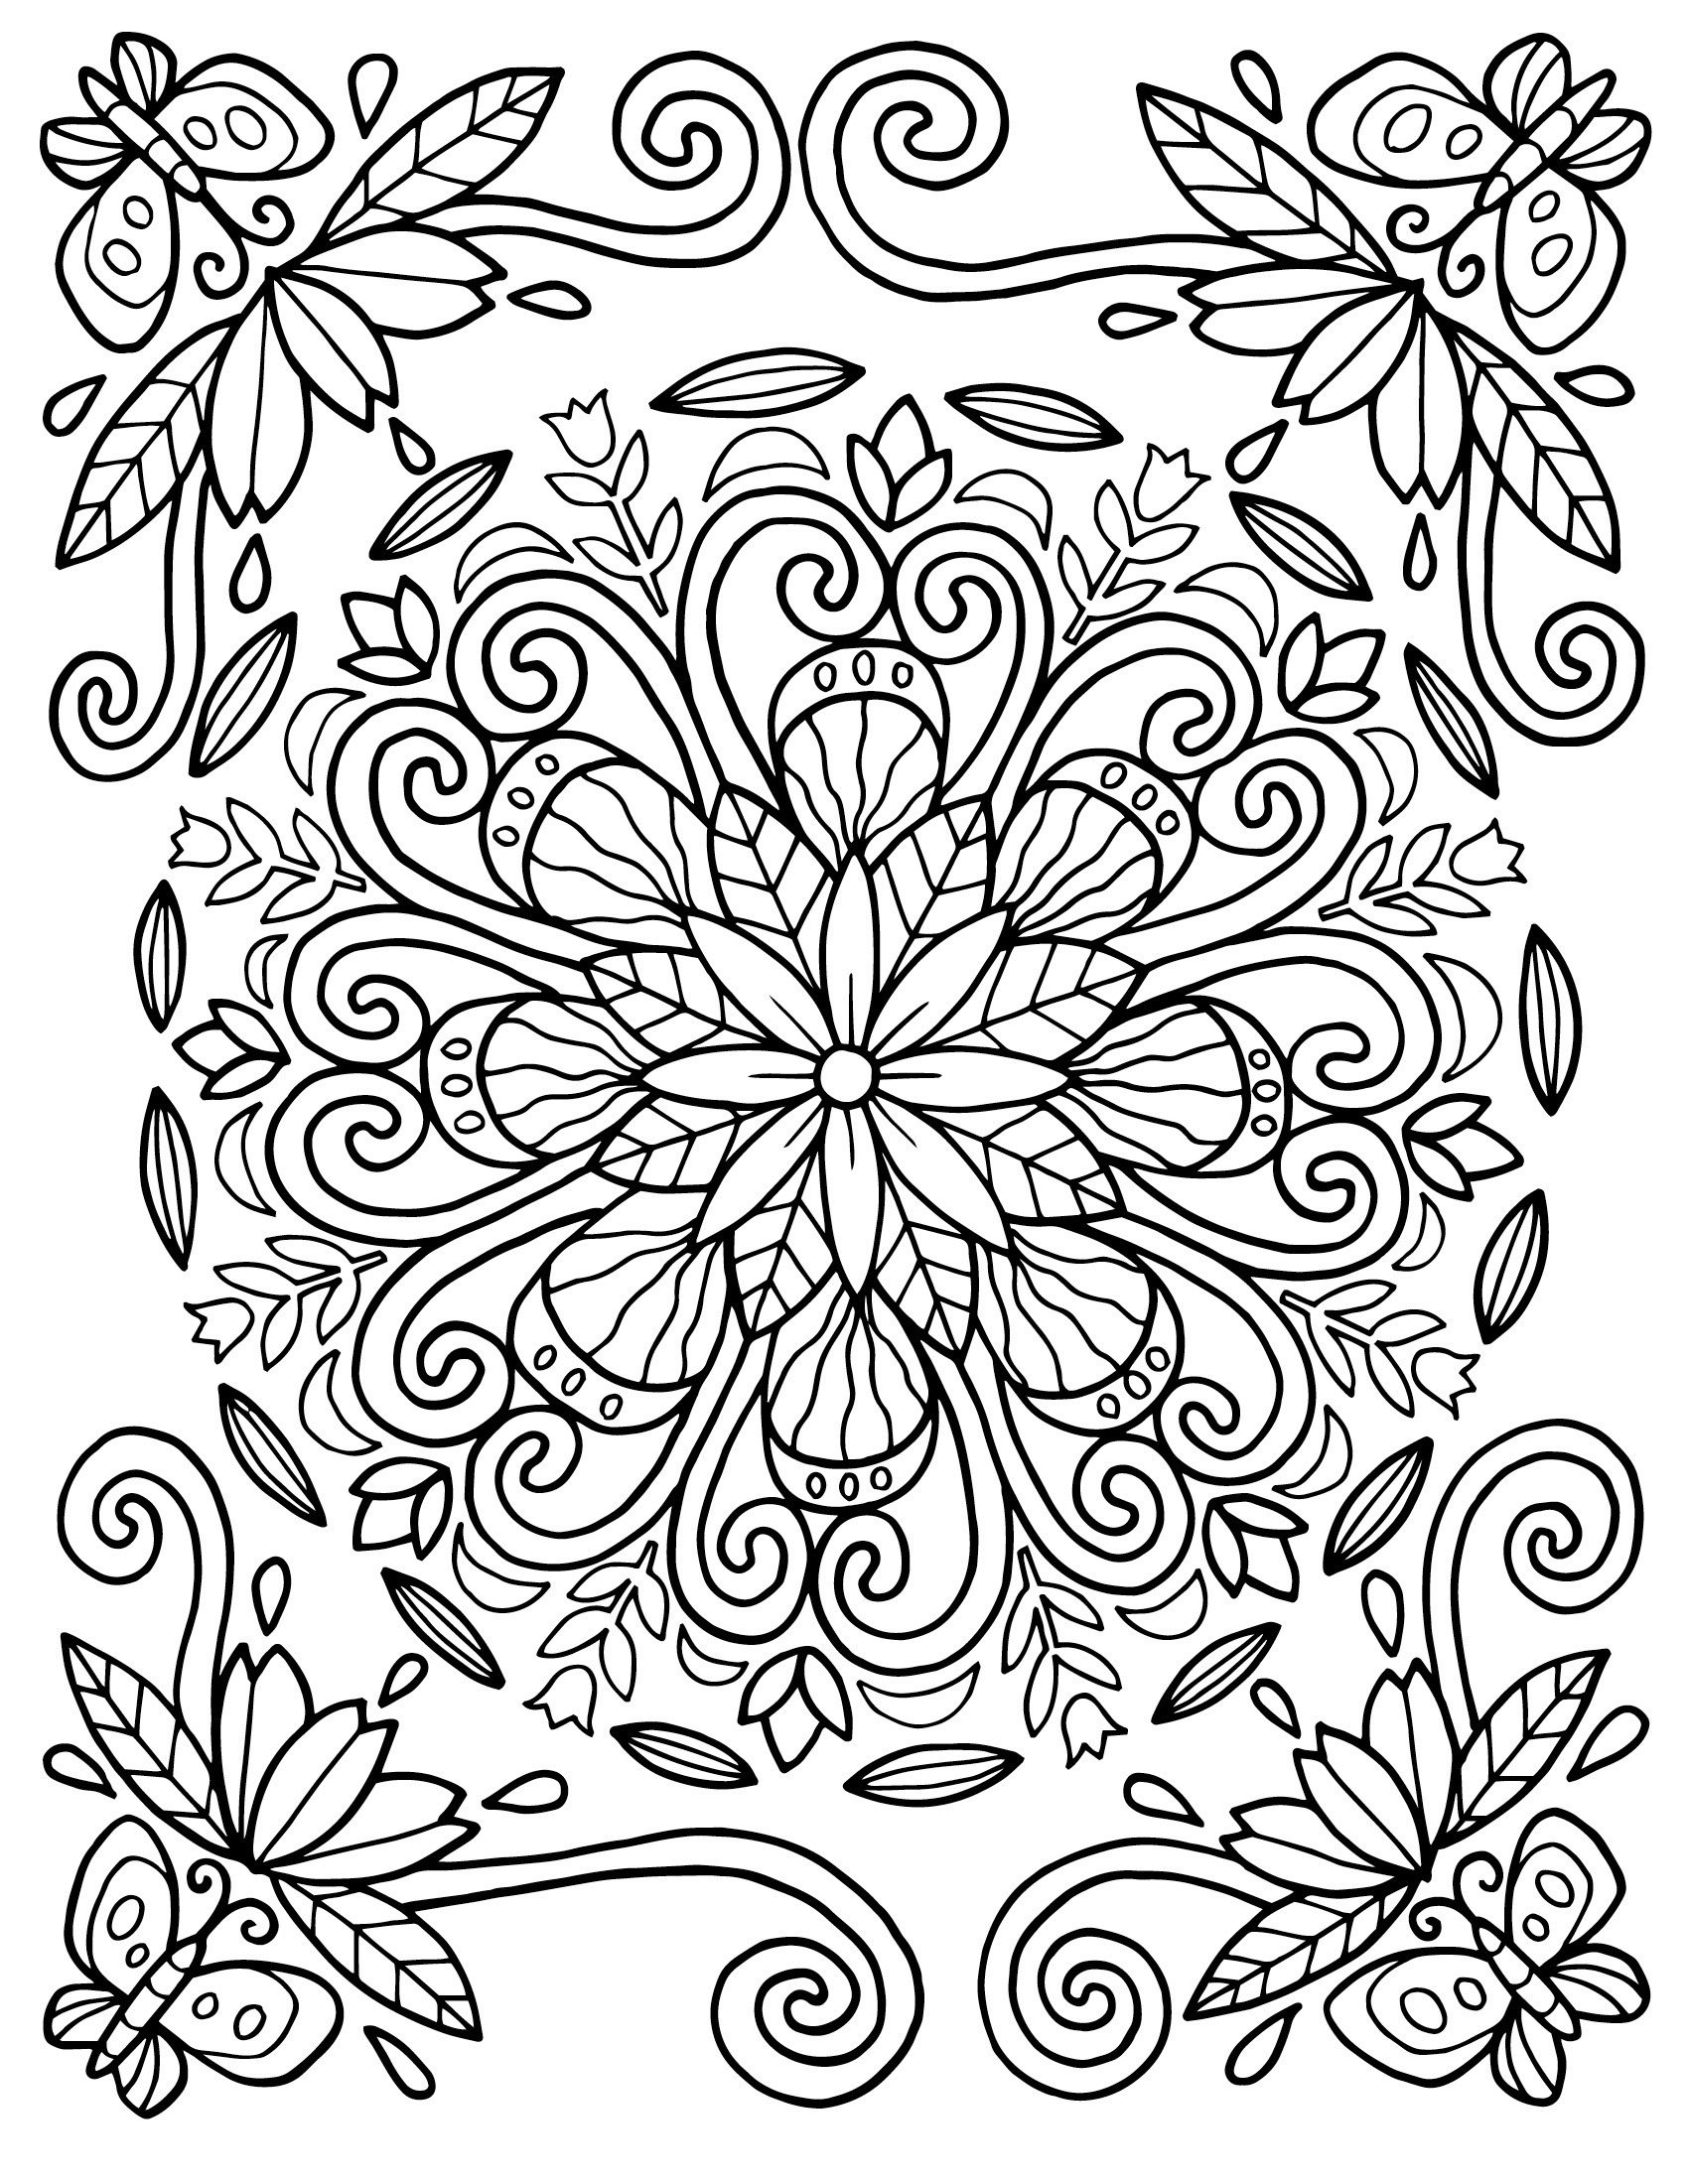 floral pattern coloring pages